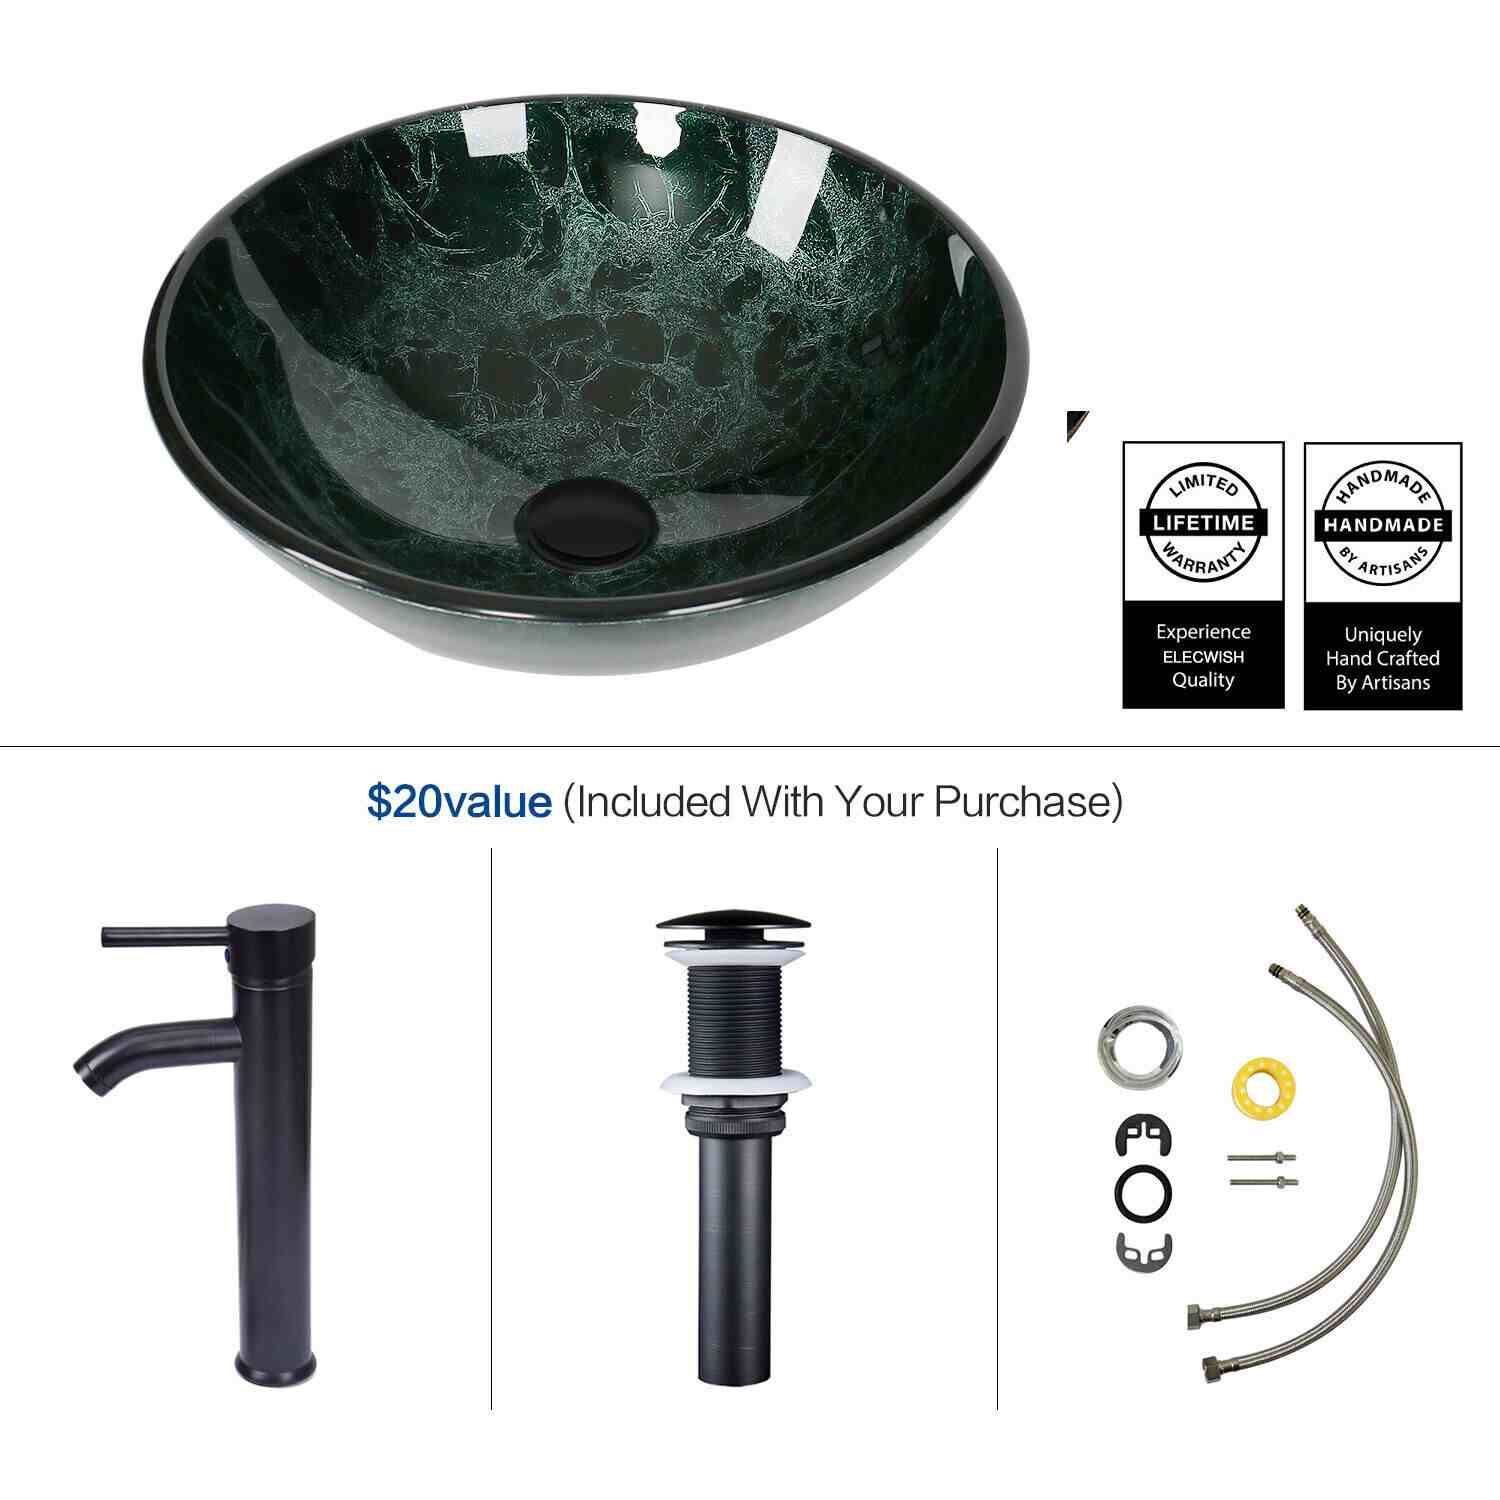 Elecwish round green sink included parts